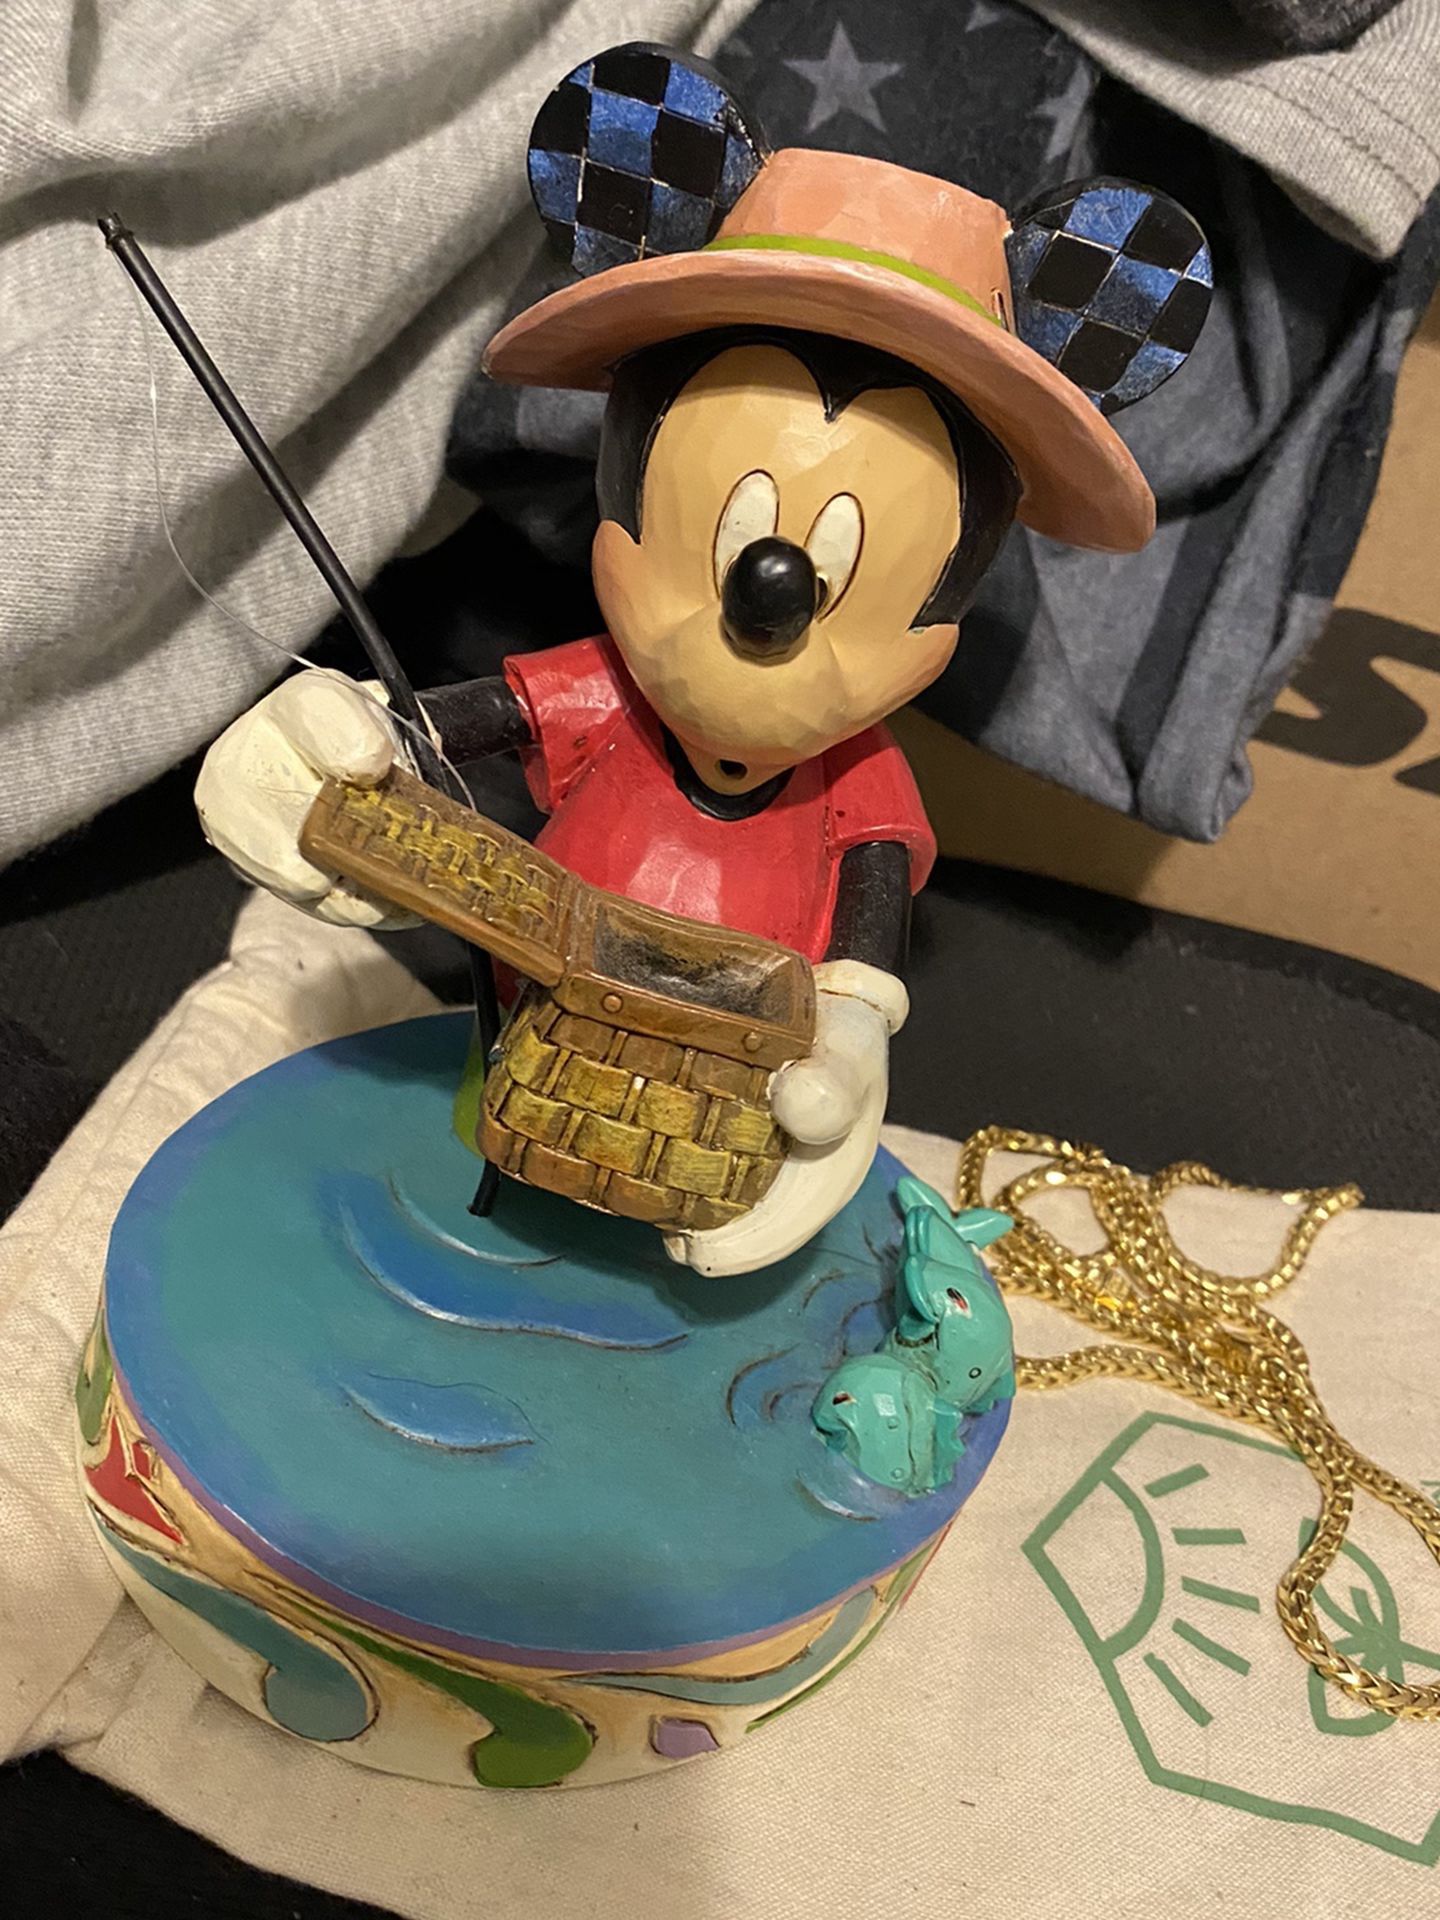 Walt Disney showcase collection Mickey Mouse “I’d rather be fishing” Figurine